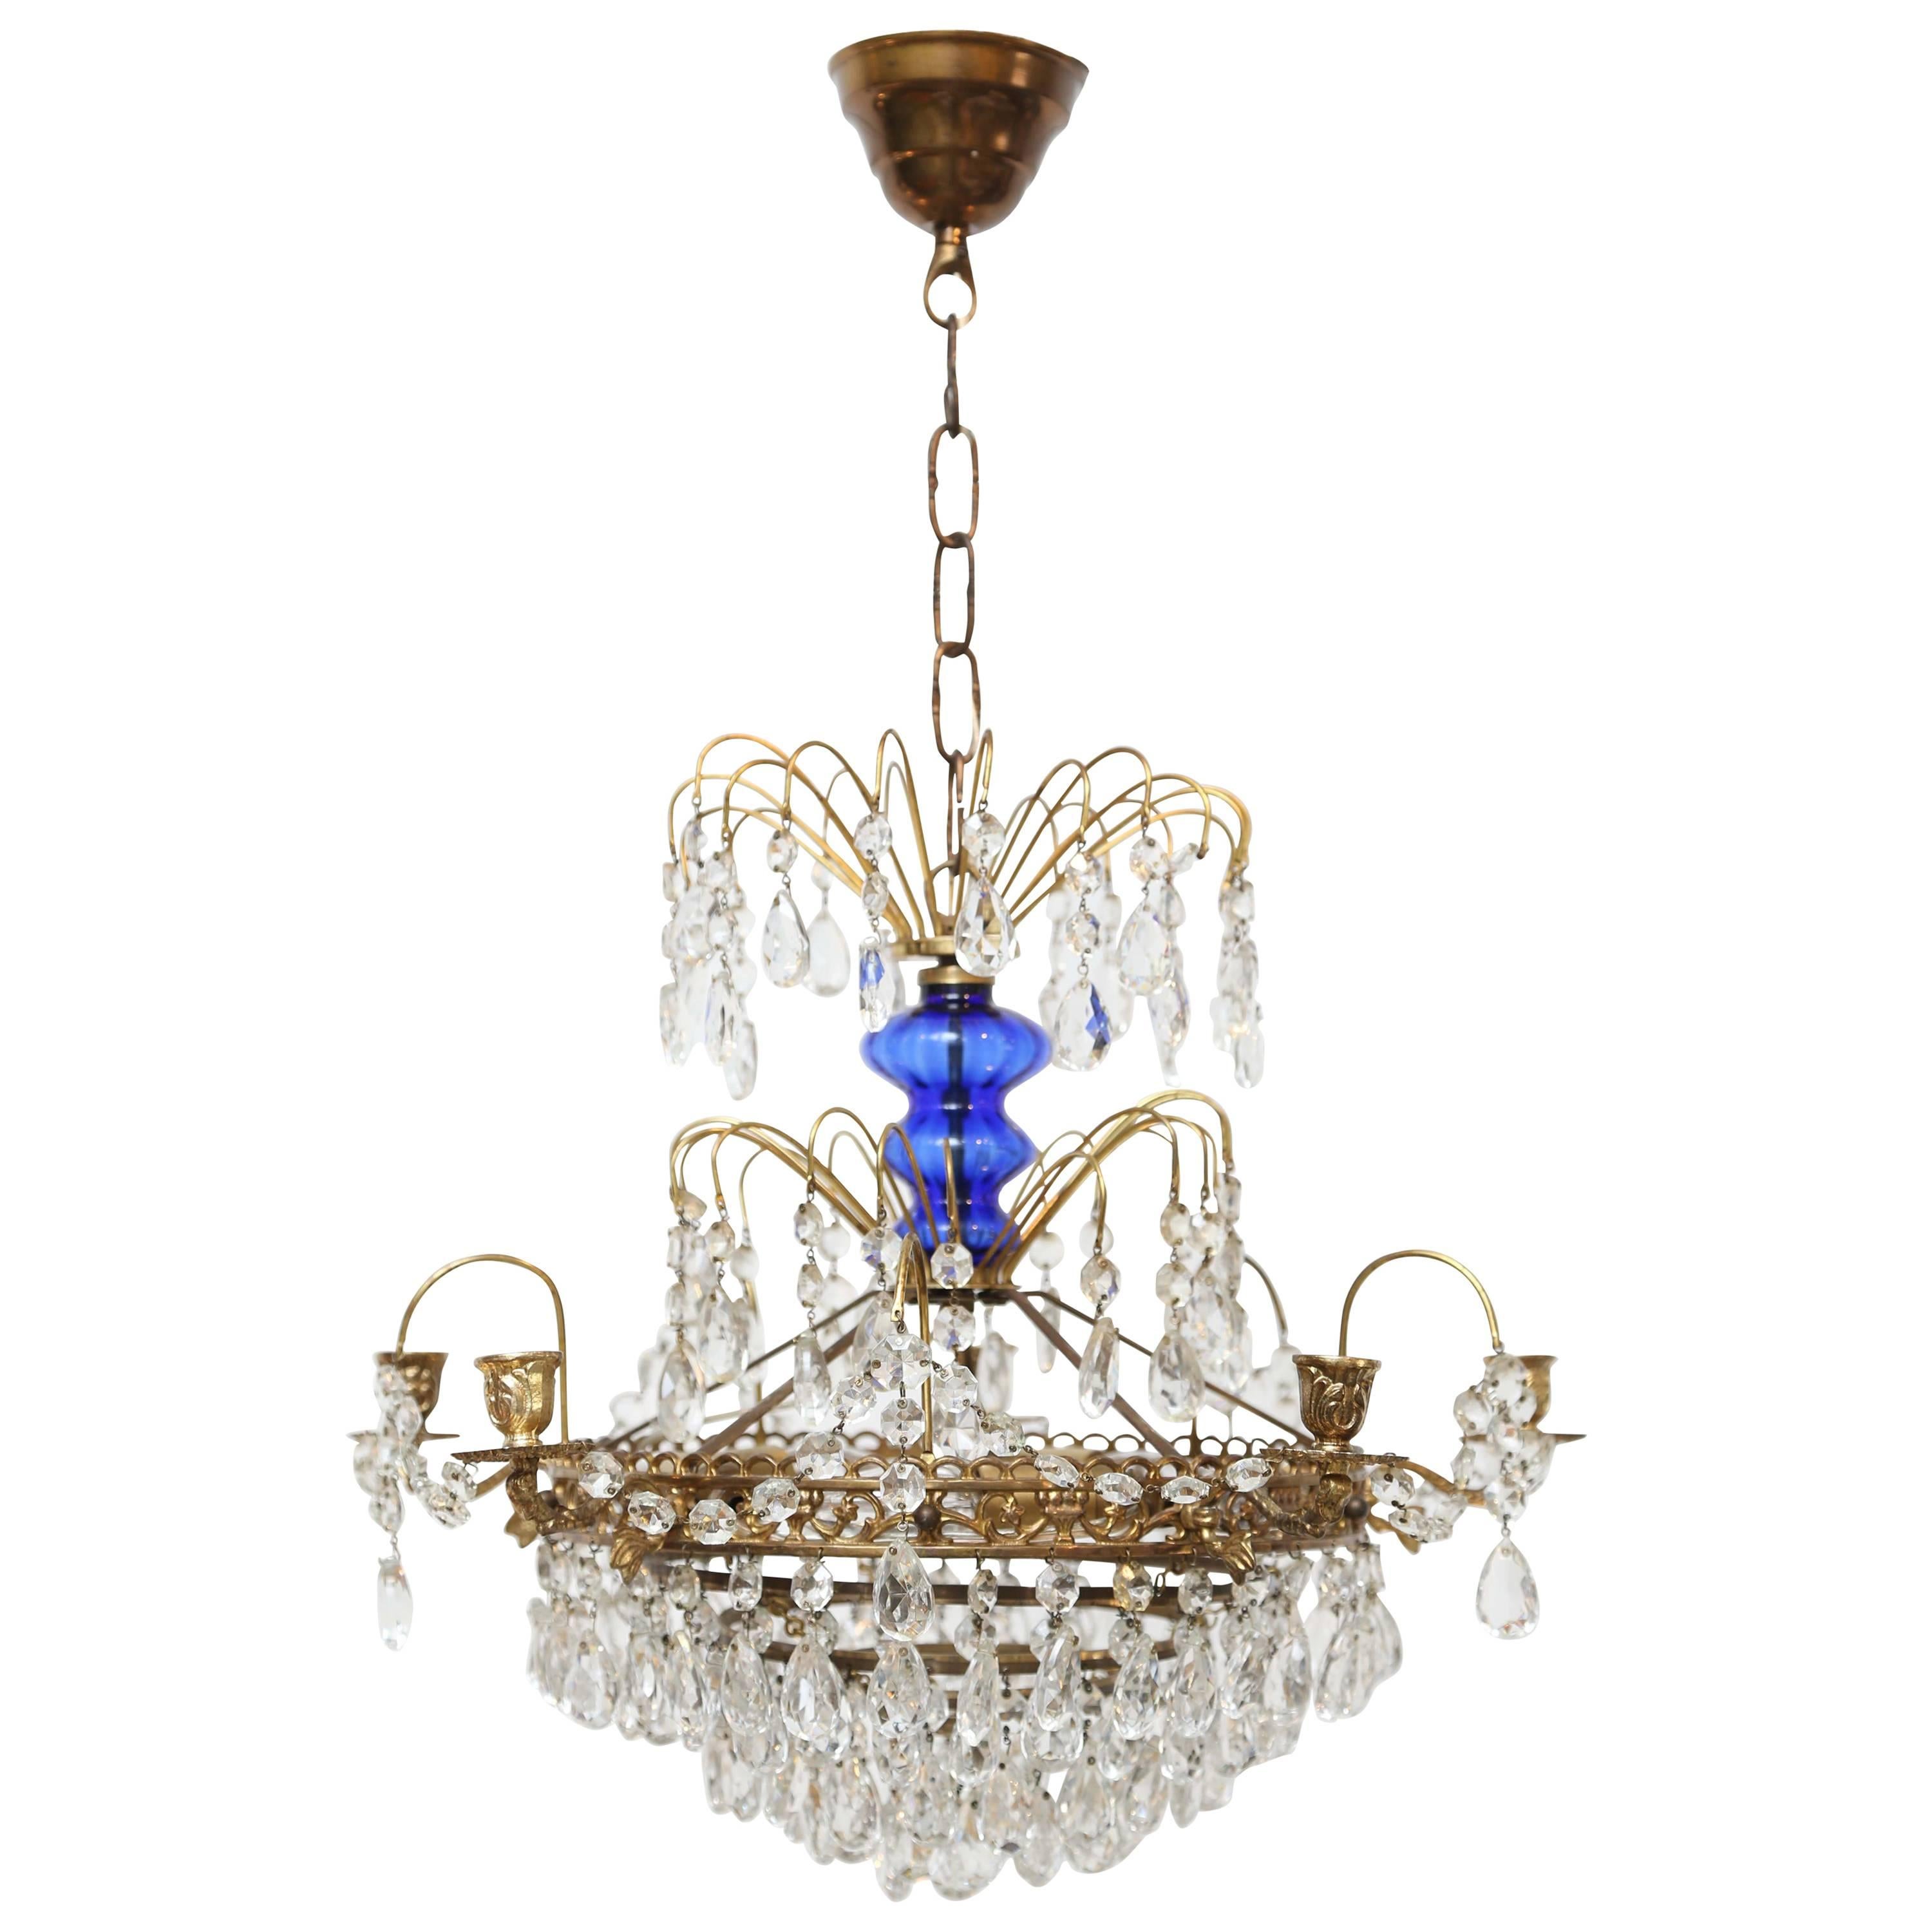  Antique Swedish Louis XVI style small scale chandelier  Mid 20th Century